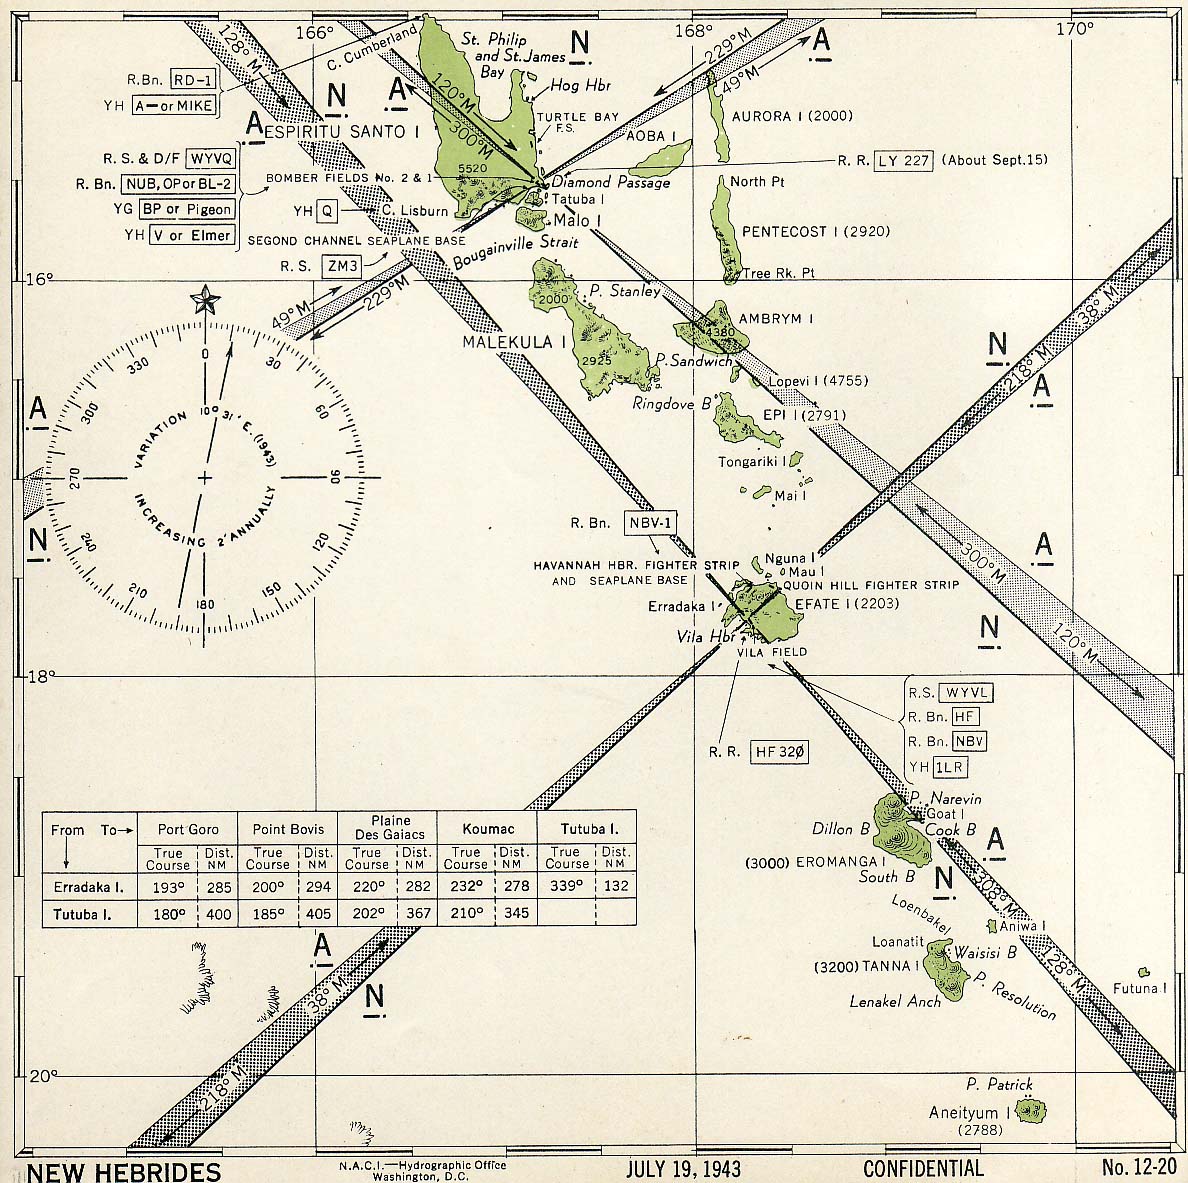 United States Hydrographic Office July 1943 map of the New Hebrides Islands (now Vanuatu) showing friendly aircraft approach bearings.